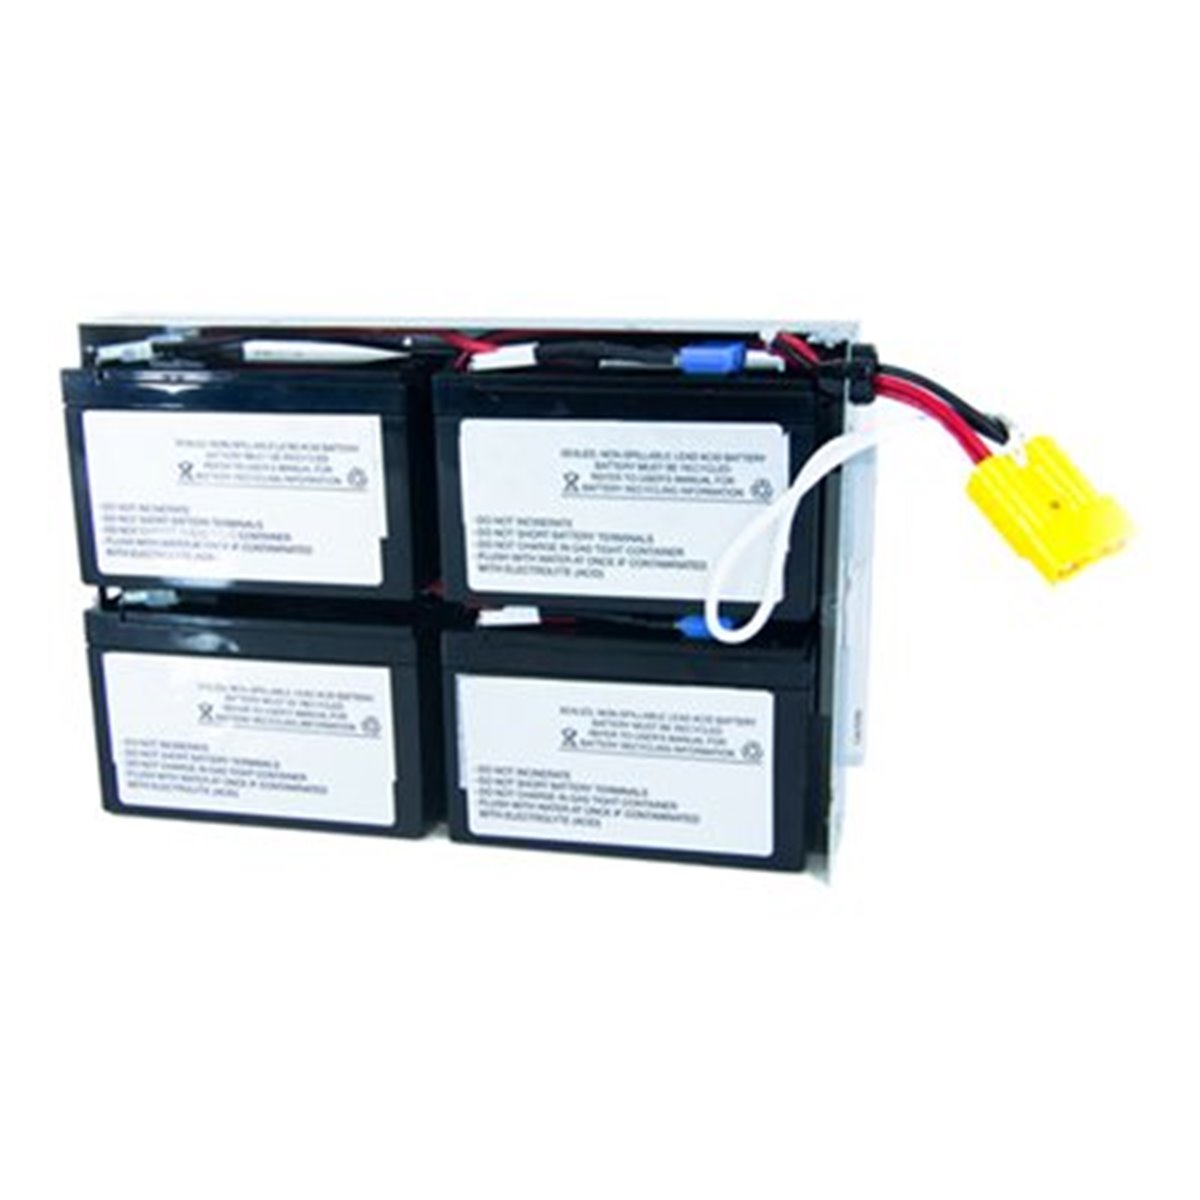 REPLACEMENT UPS BATTERY-CARTRIDGE RBC24 FOR APC SMART-UP